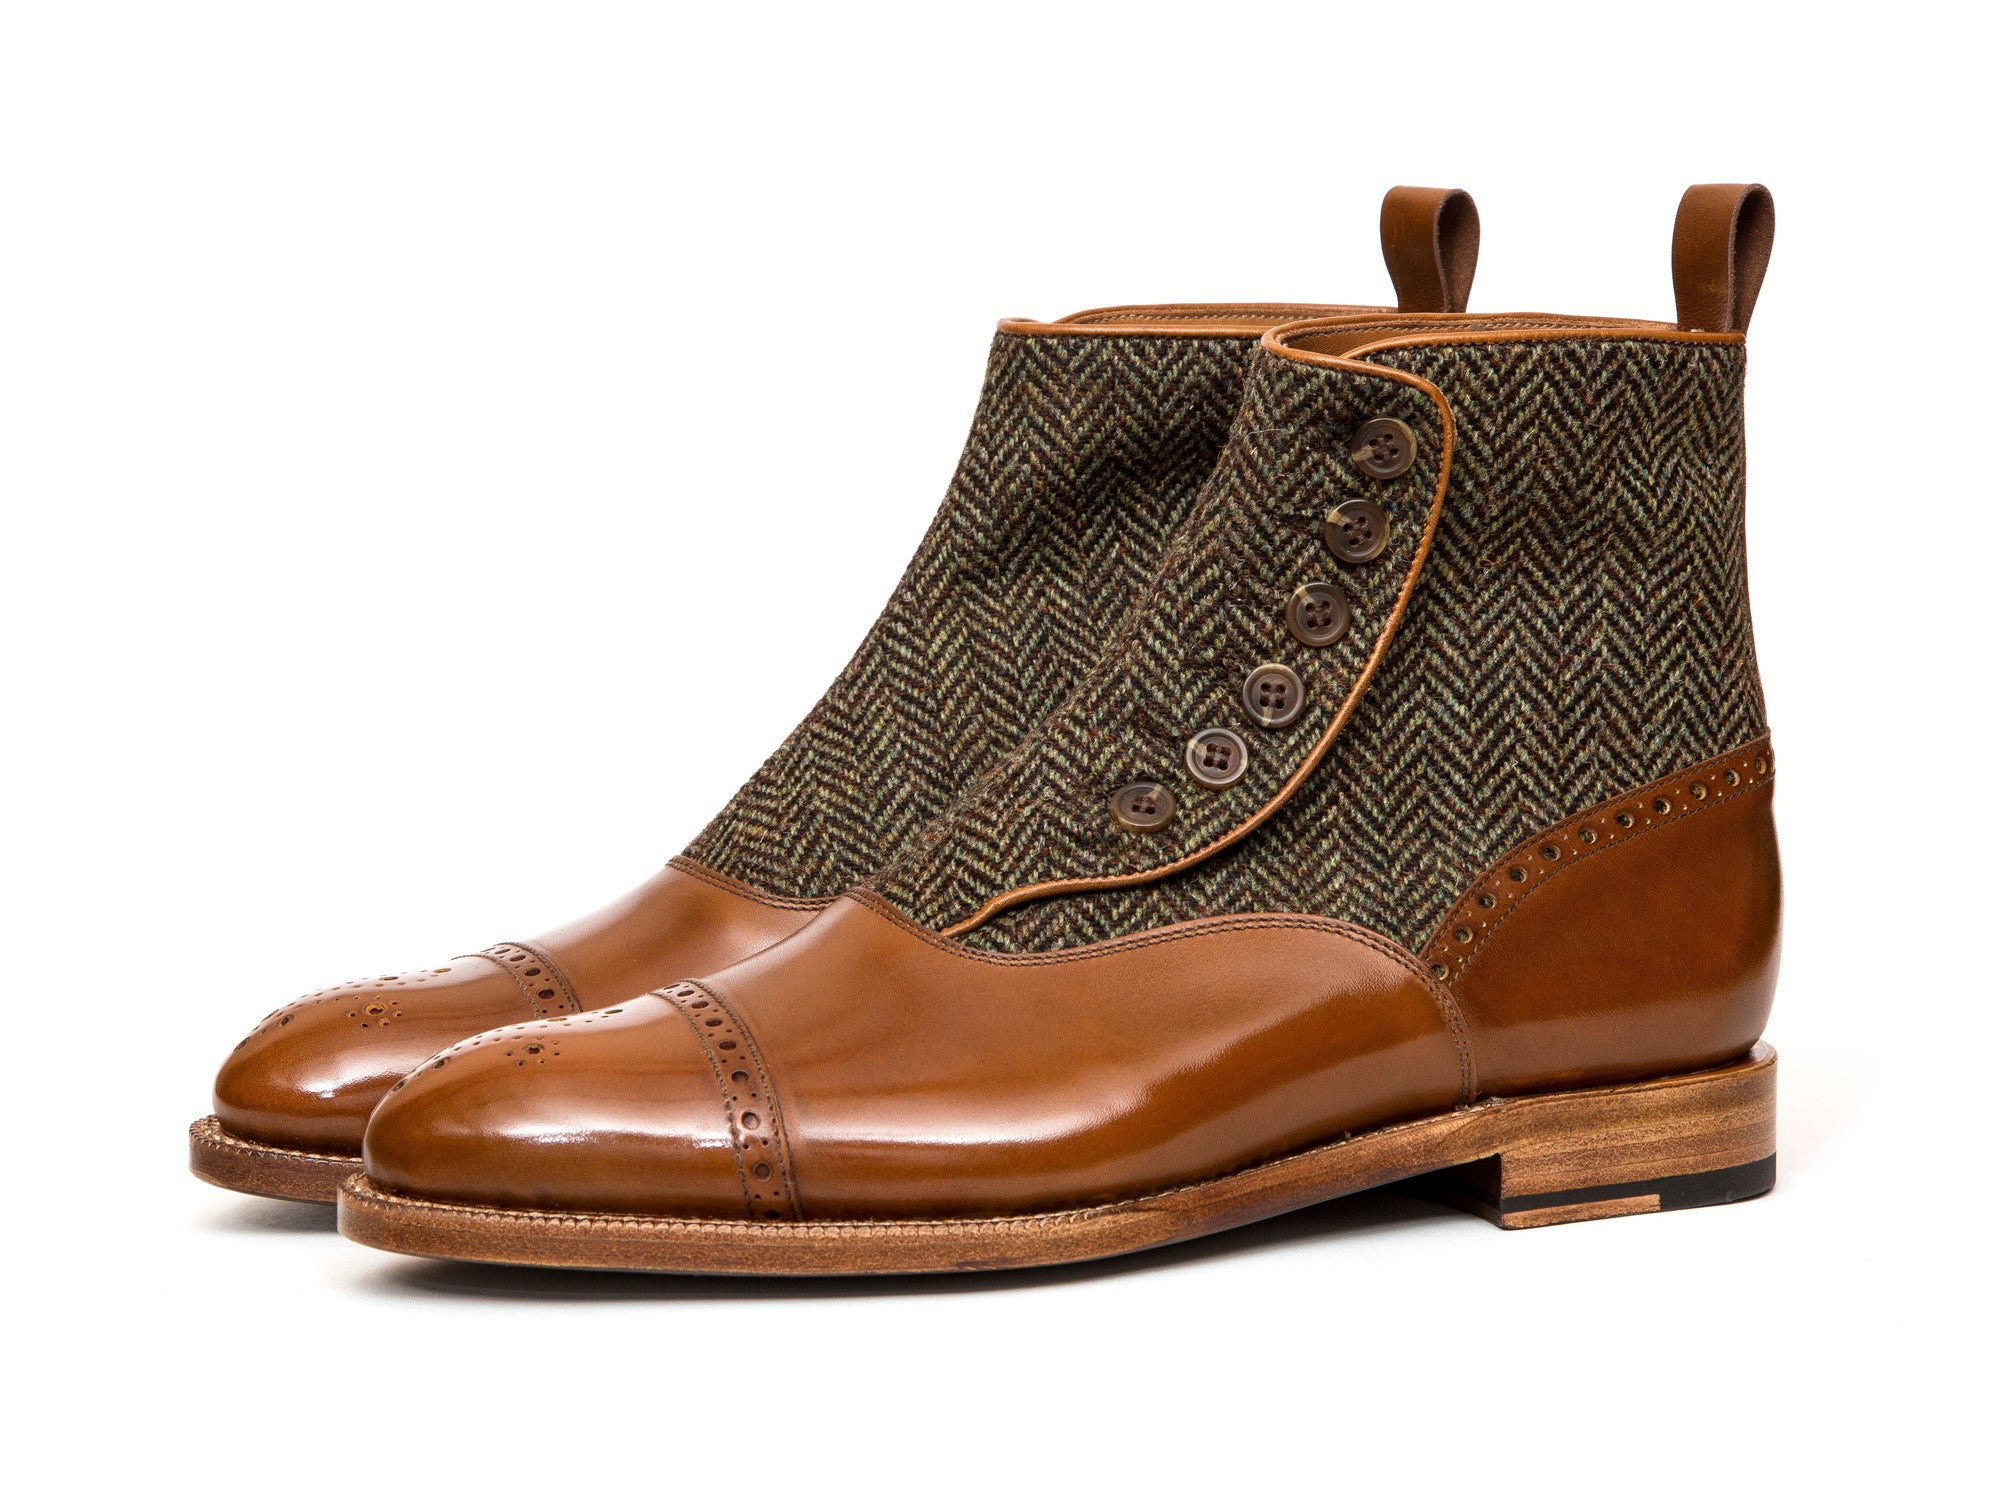 Blue Ridge - MTO - Maple Calf / Forest Tweed - NGT Last - Natural Single Leather Sole